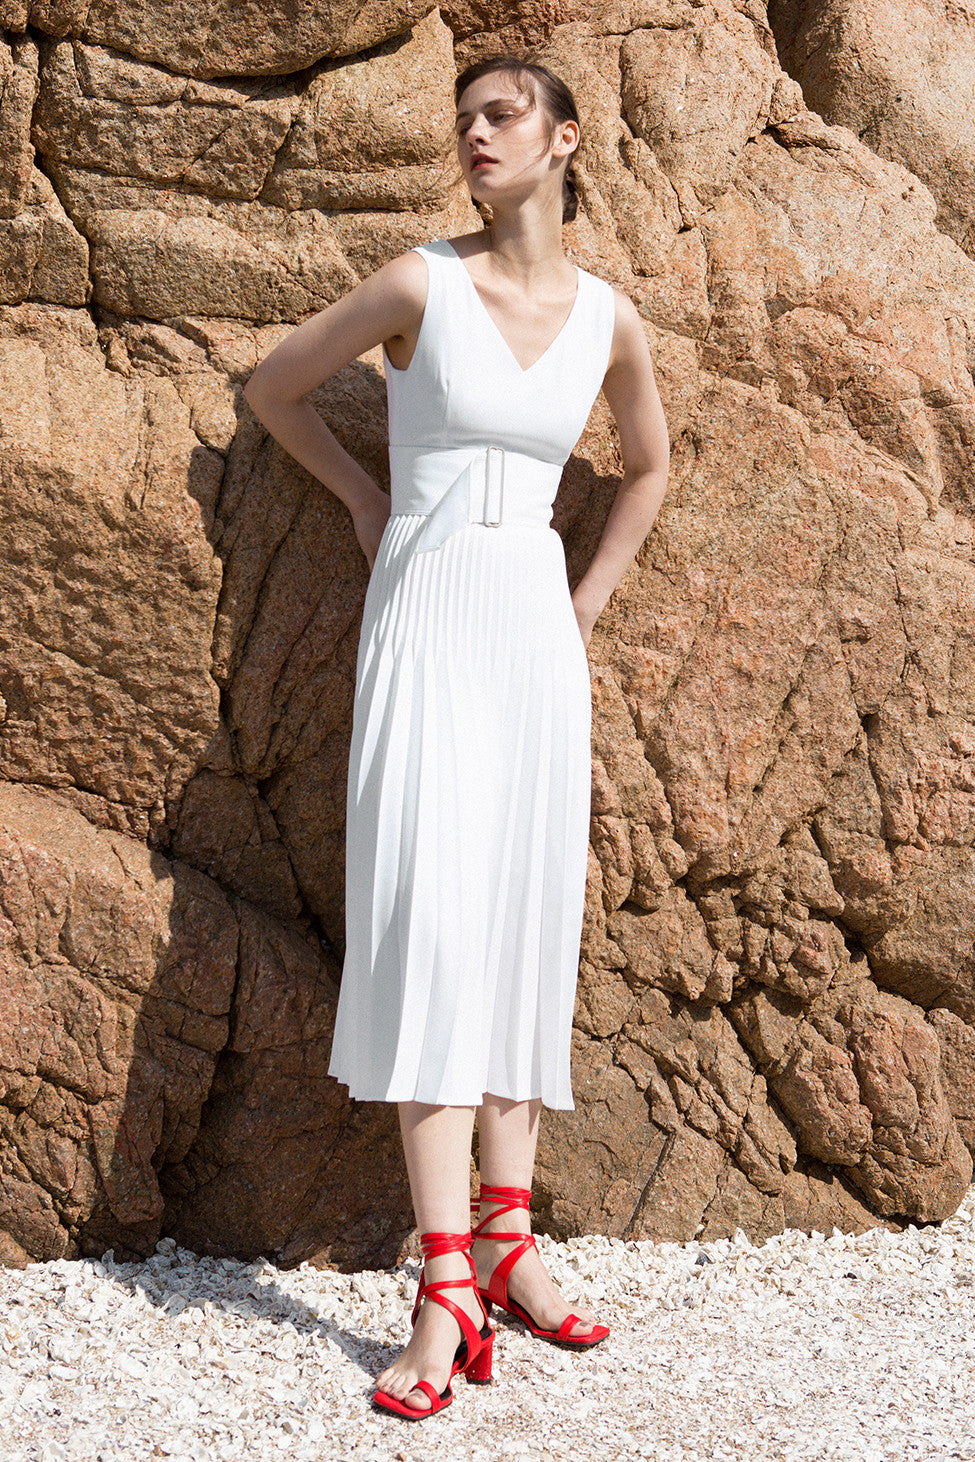 The Simma Dress in White, featuring v-neckline, sleeveless, removable wide belt, pleated skirt. Concealed zip fastening at the back. Fully lined.